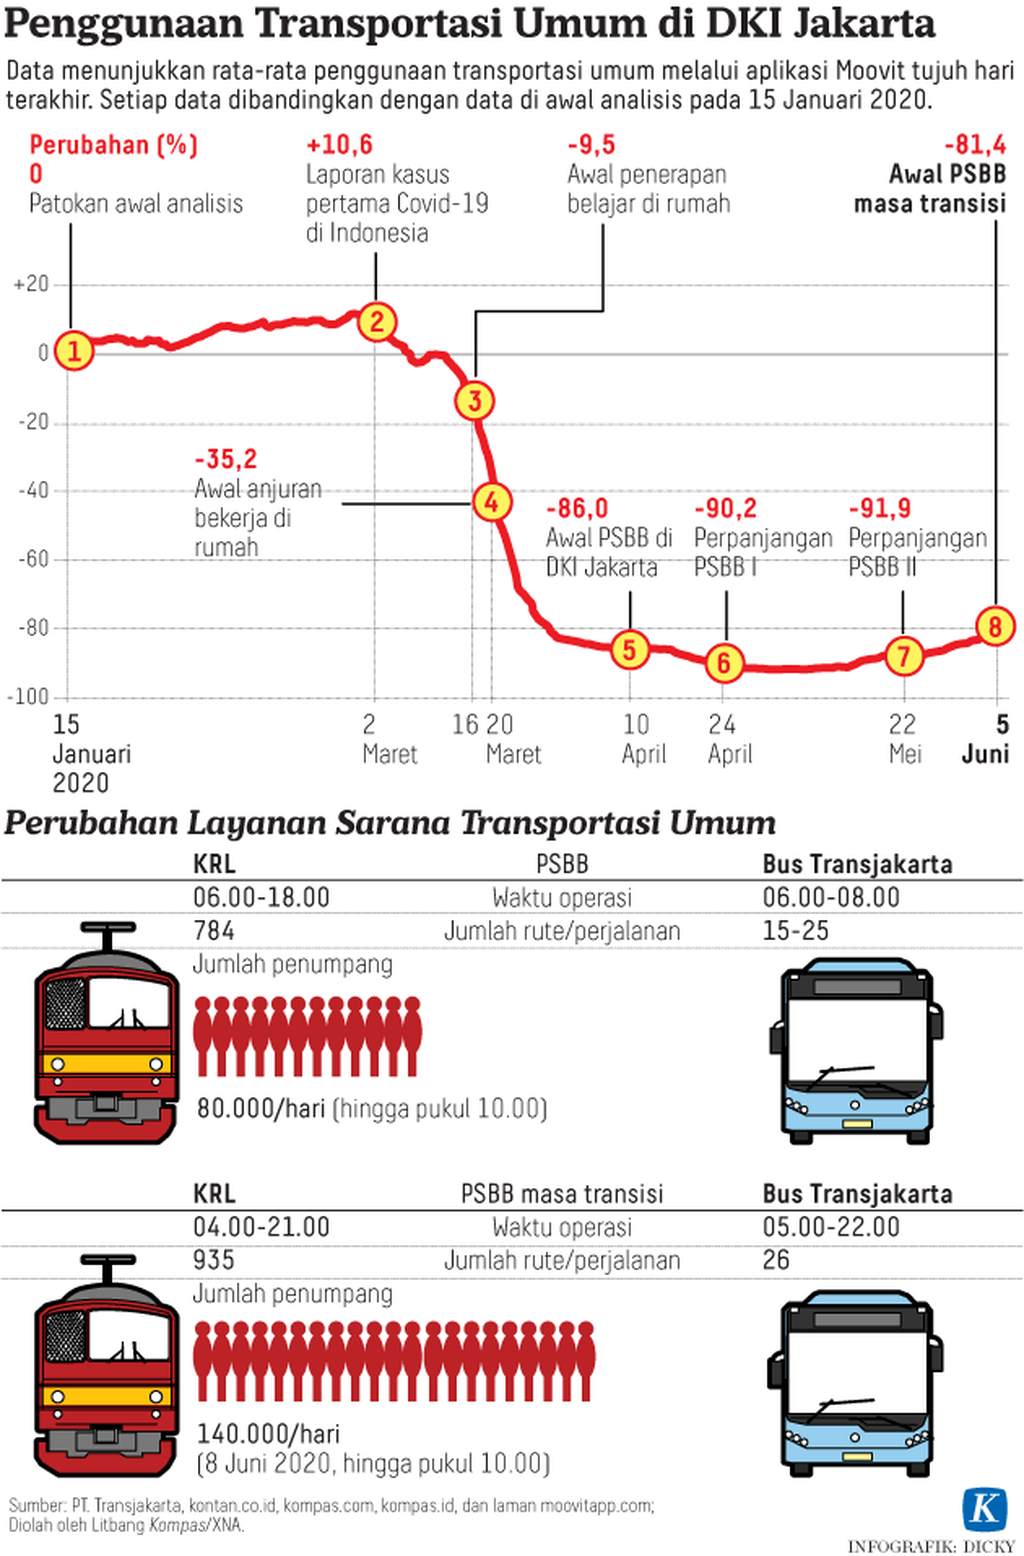 Infographic of the use of public transportation in Jakarta.